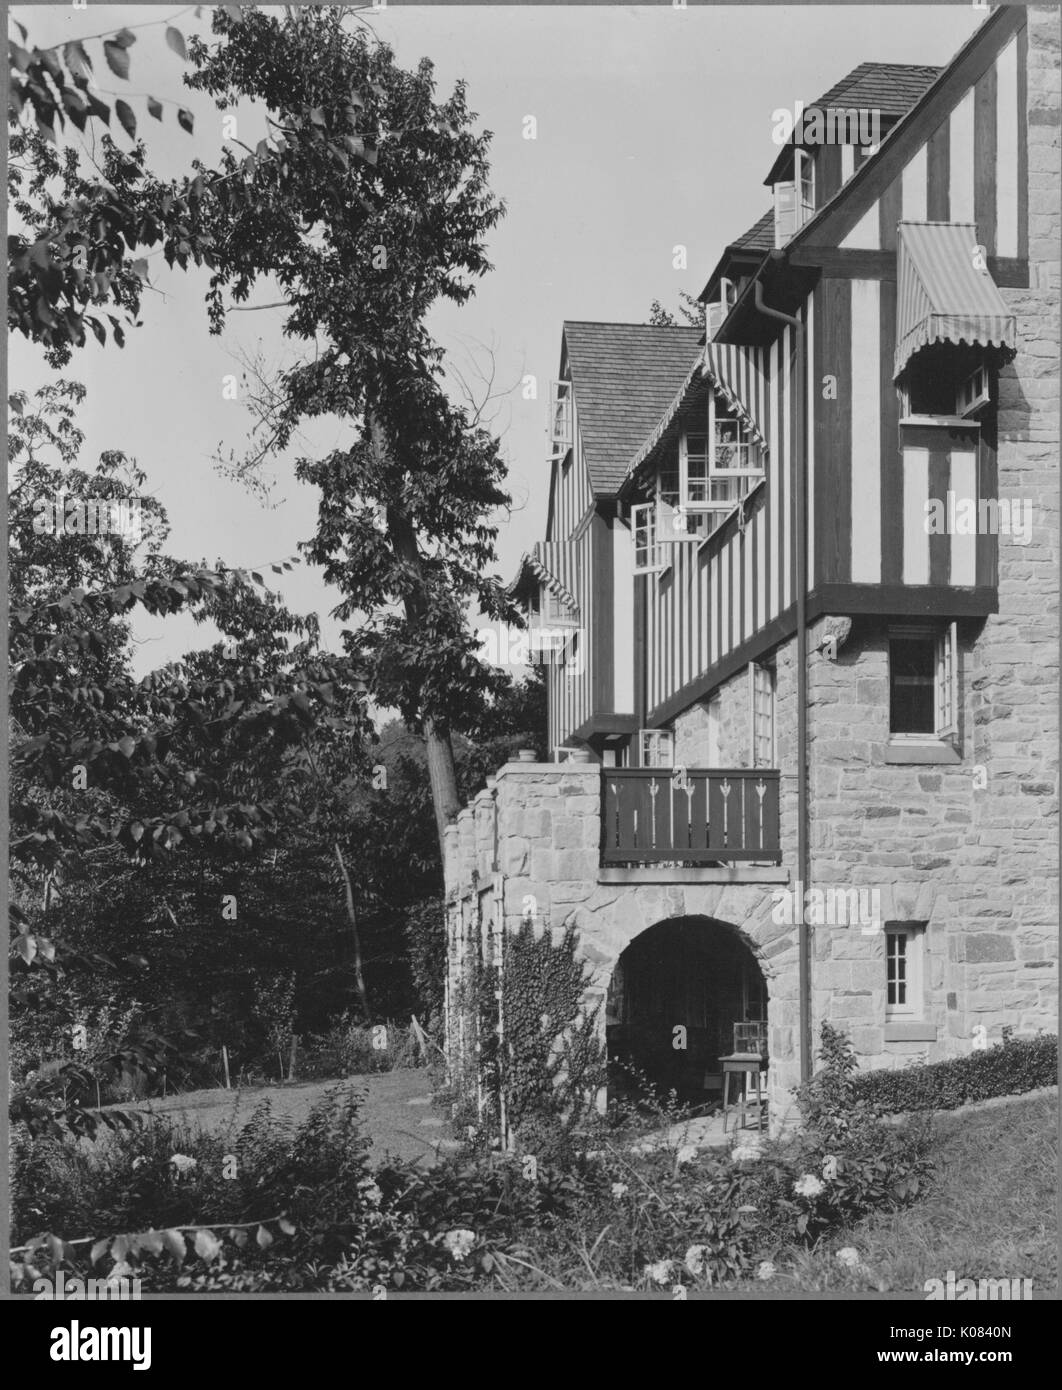 Partial view of a half-timbered and stone home taken from the side, featuring upper-story windows with striped awnings, narrow windows throughout, a second-story balcony, a first-story porch with stone arches, set in a landscaped yard with trees, shrubbery, and flowers, in Baltimore, Maryland, 1910. This image is from a series documenting the construction and sale of homes in the Roland Park/Guilford neighborhood of Baltimore, a streetcar suburb and one of the first planned communities in the United States. Stock Photo